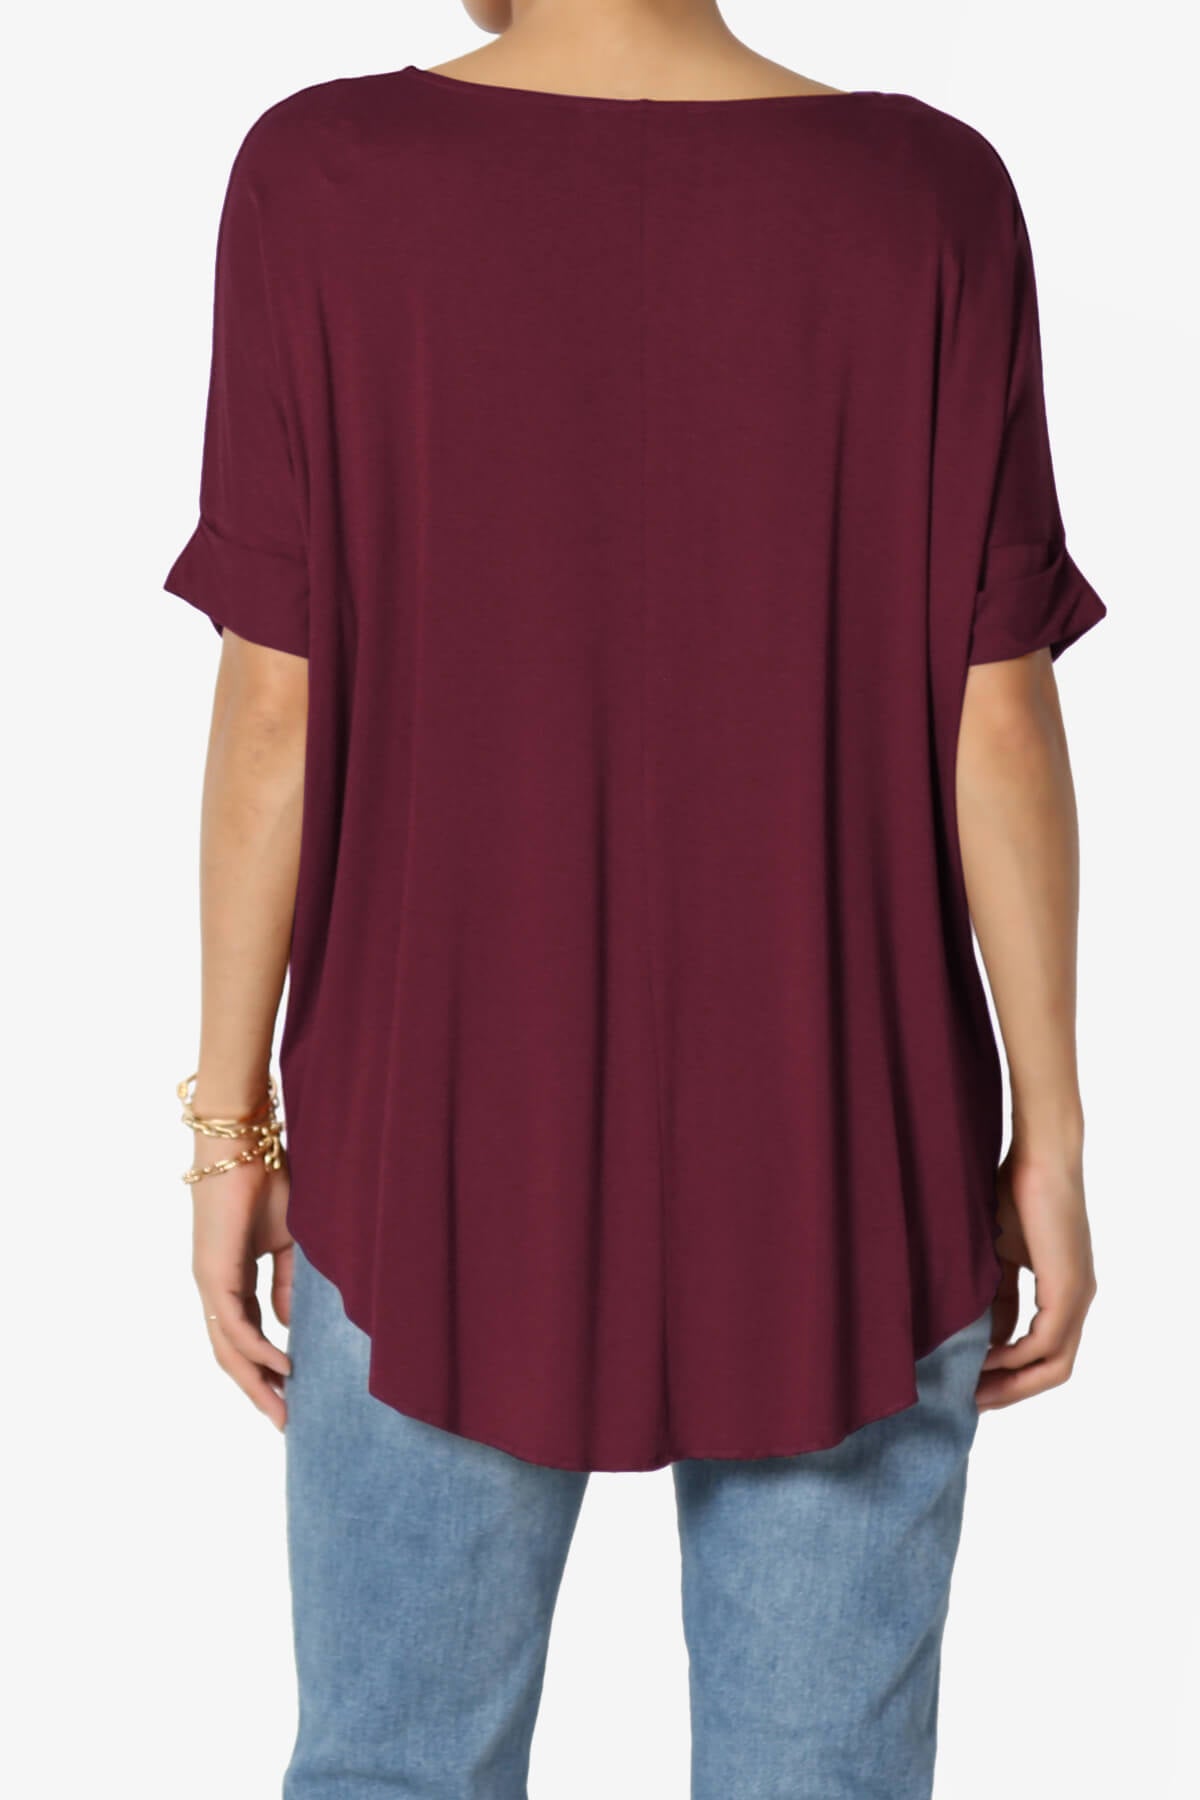 Load image into Gallery viewer, Tackle Wrap Hi-Low Crepe Knit Top DARK BURGUNDY_2
